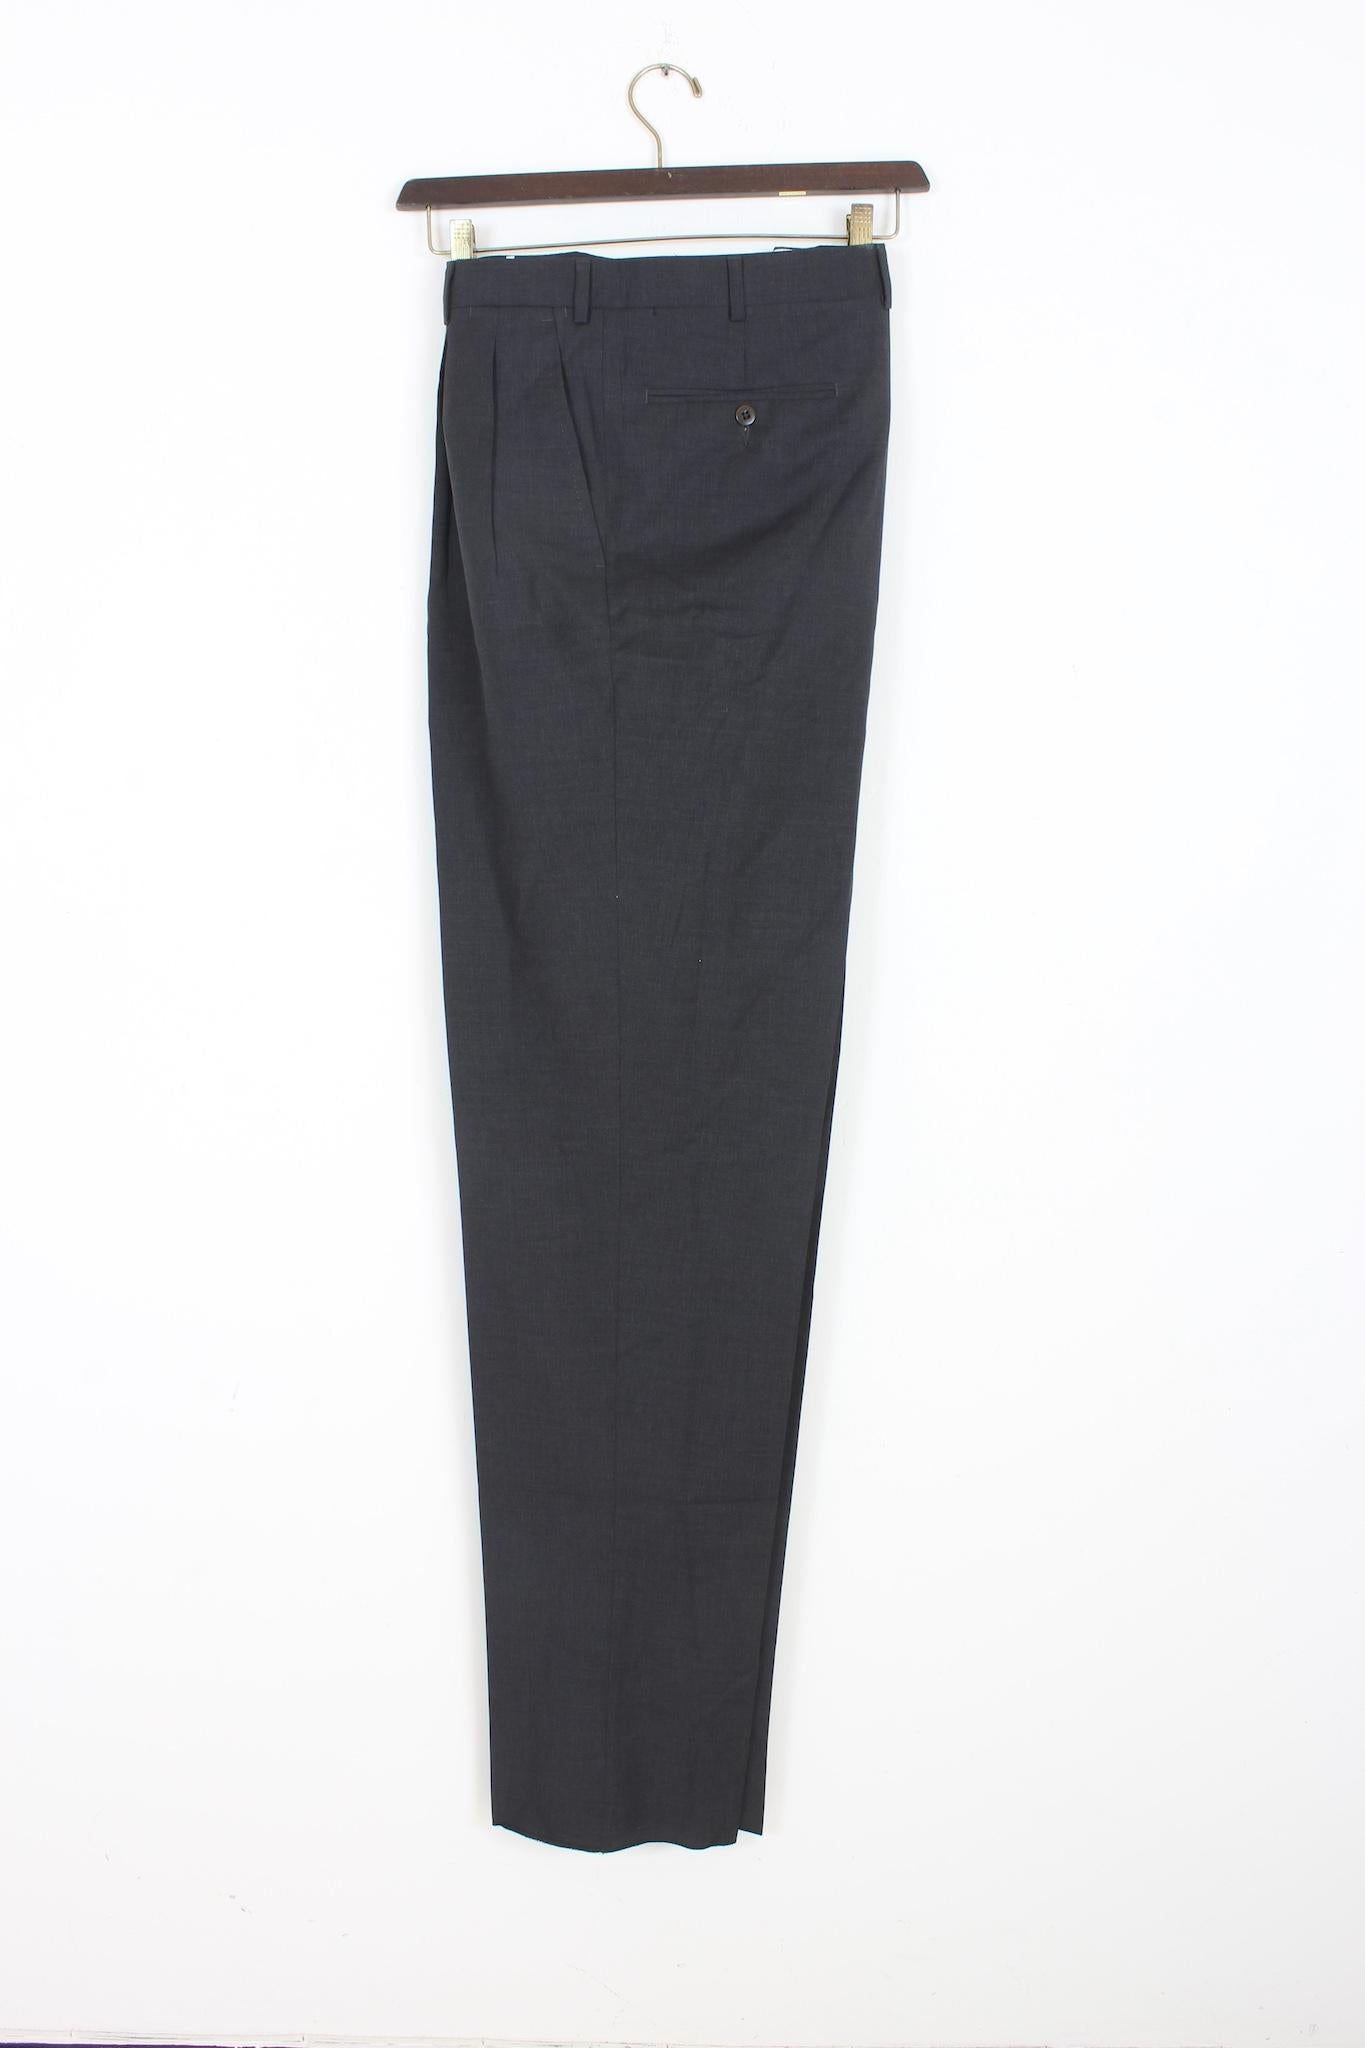 Burberry classic vintage 90s trousers. Grey, side pockets, button and zipper closure. 100% wool fabric. Made in italy.

Size: 58 It 48 Us 48 Uk

Waist: 50 cm
Length: 125 cm
Inseam length: 95 cm
Hem: 23 cm